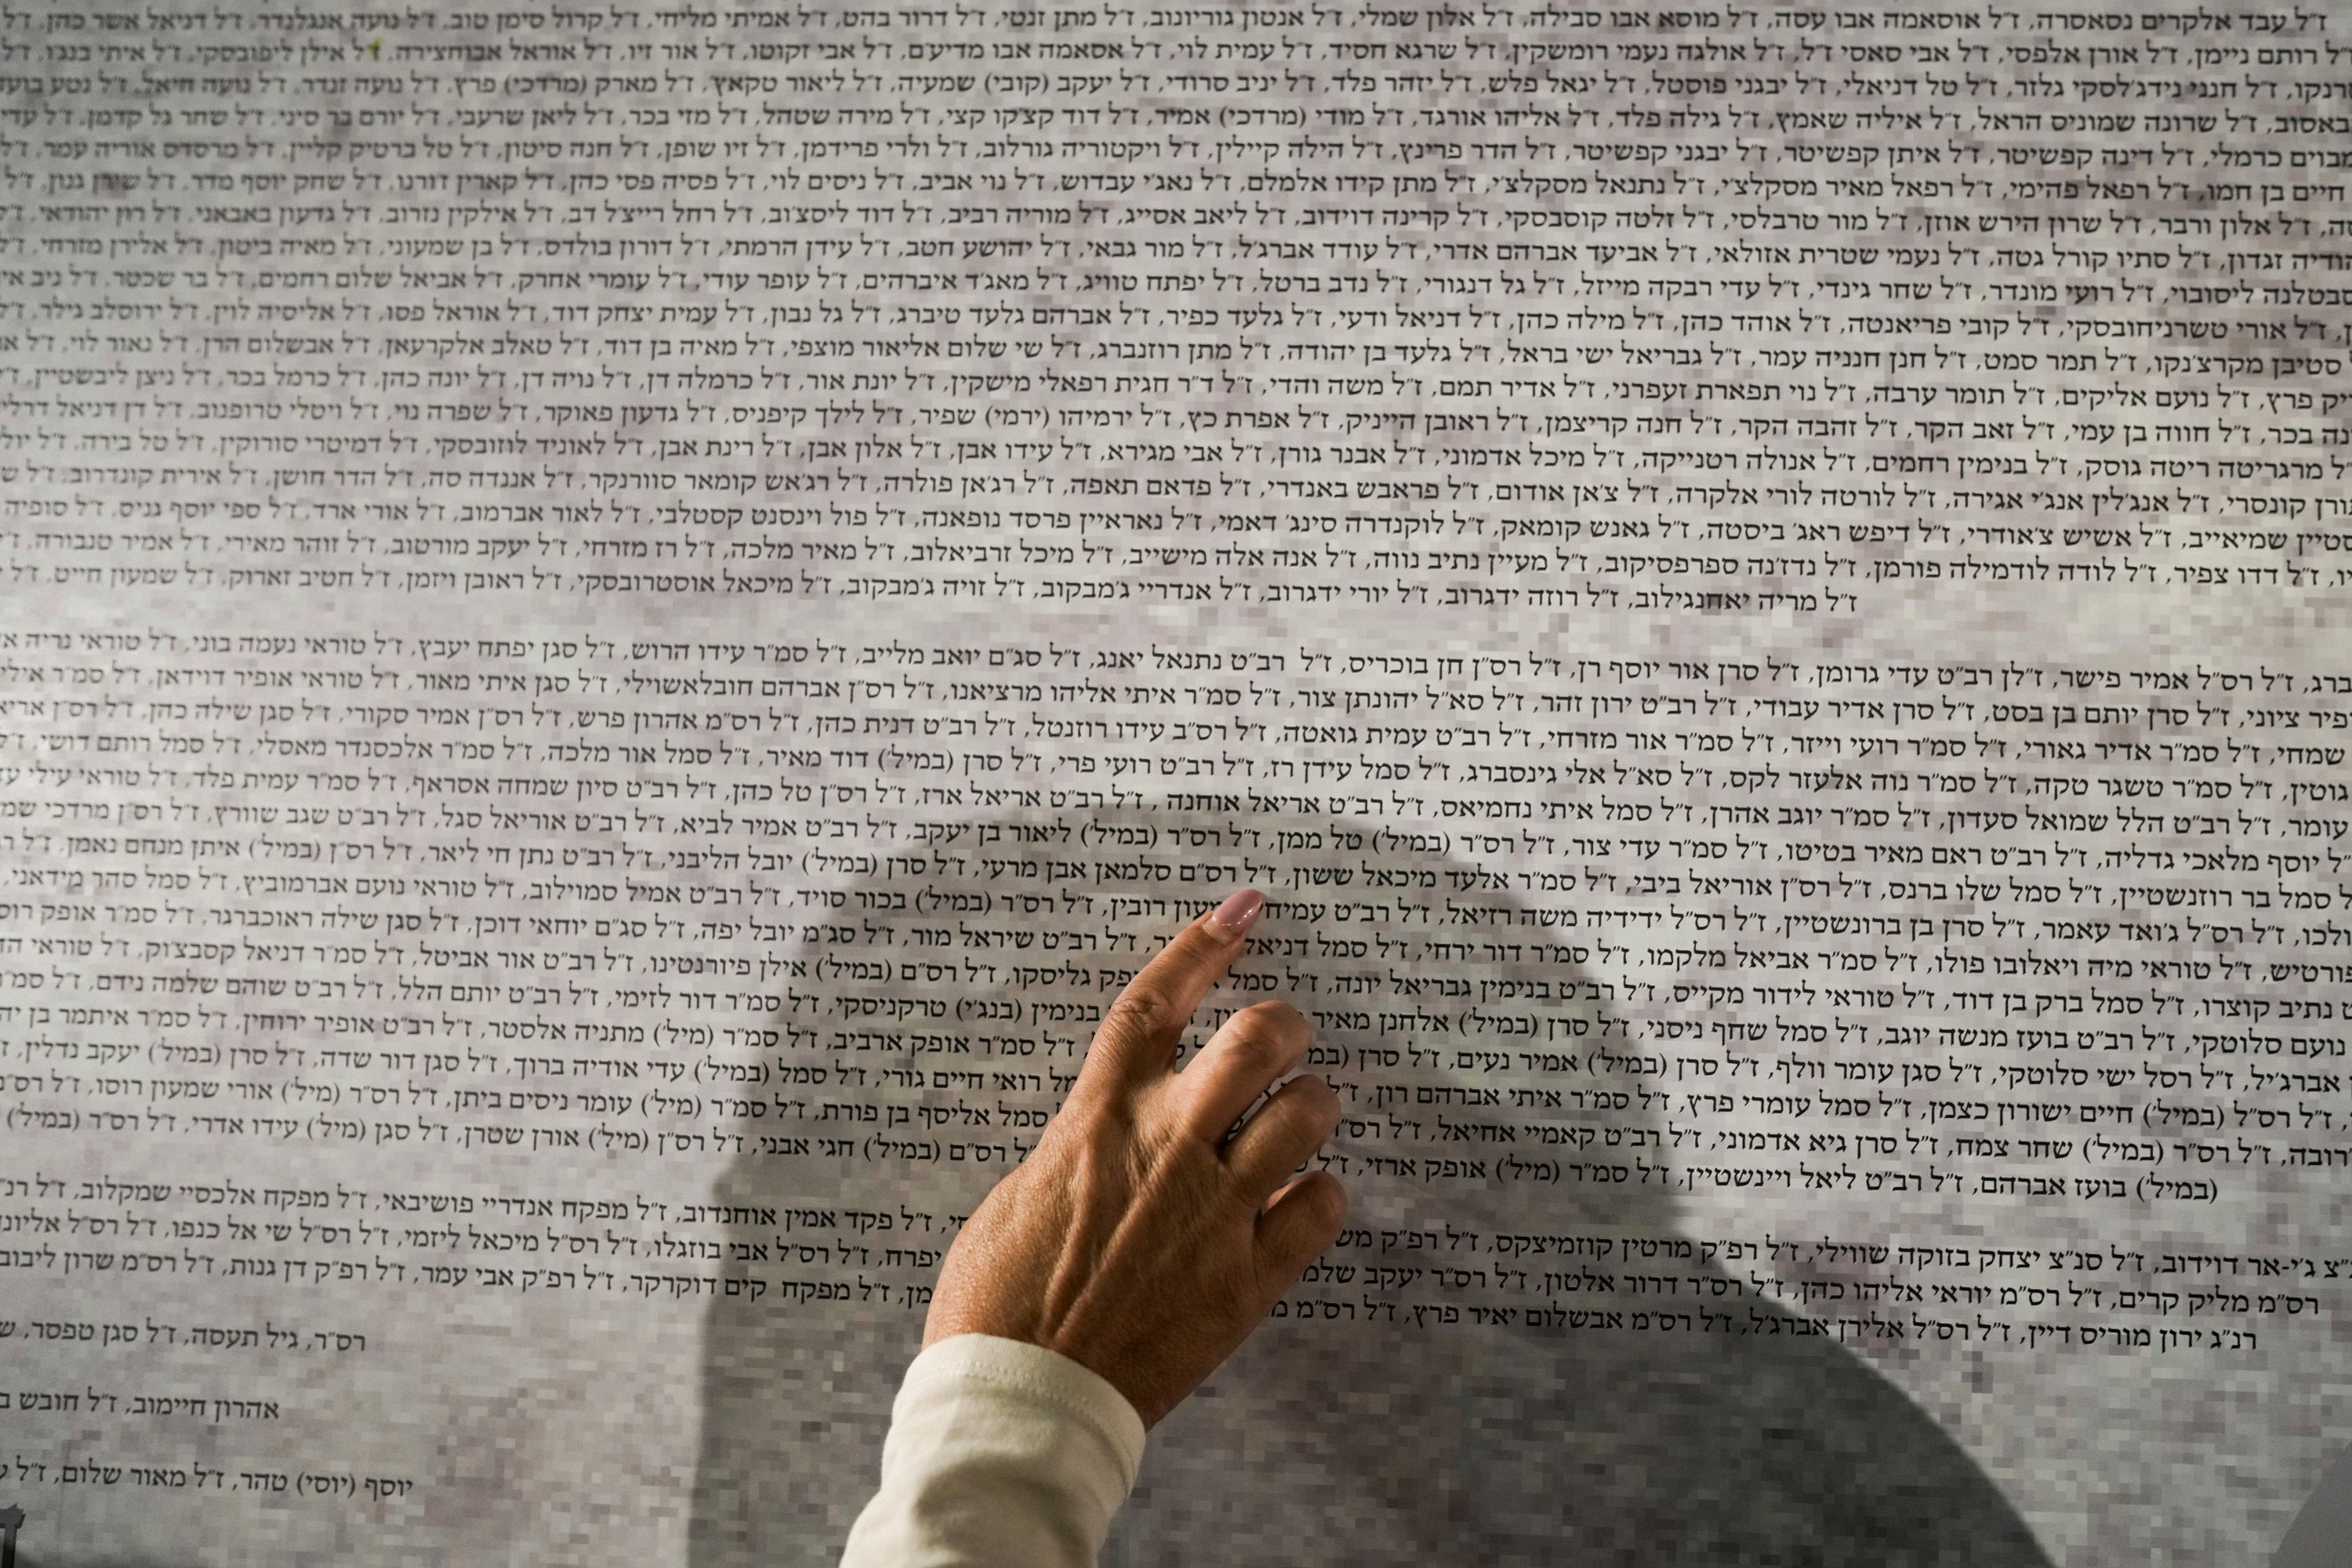 A woman looks for names on a memorial wall in Jerusalem's Old City on November 6 that lists the 1,400 people killed in the October 7 attack by Hamas militants on Israel.